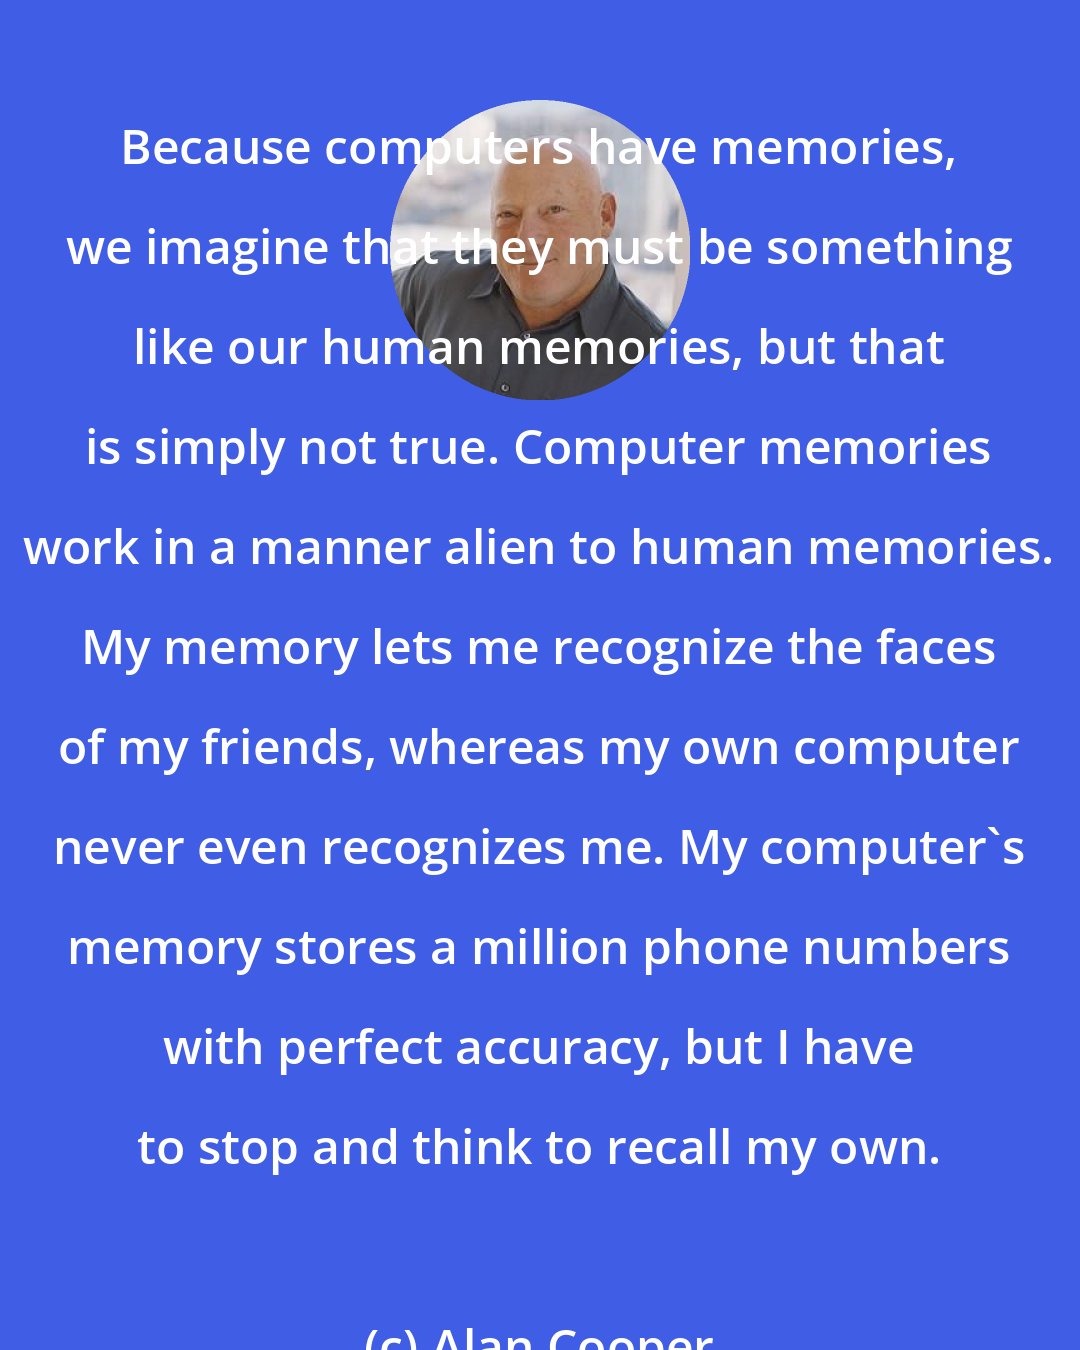 Alan Cooper: Because computers have memories, we imagine that they must be something like our human memories, but that is simply not true. Computer memories work in a manner alien to human memories. My memory lets me recognize the faces of my friends, whereas my own computer never even recognizes me. My computer's memory stores a million phone numbers with perfect accuracy, but I have to stop and think to recall my own.